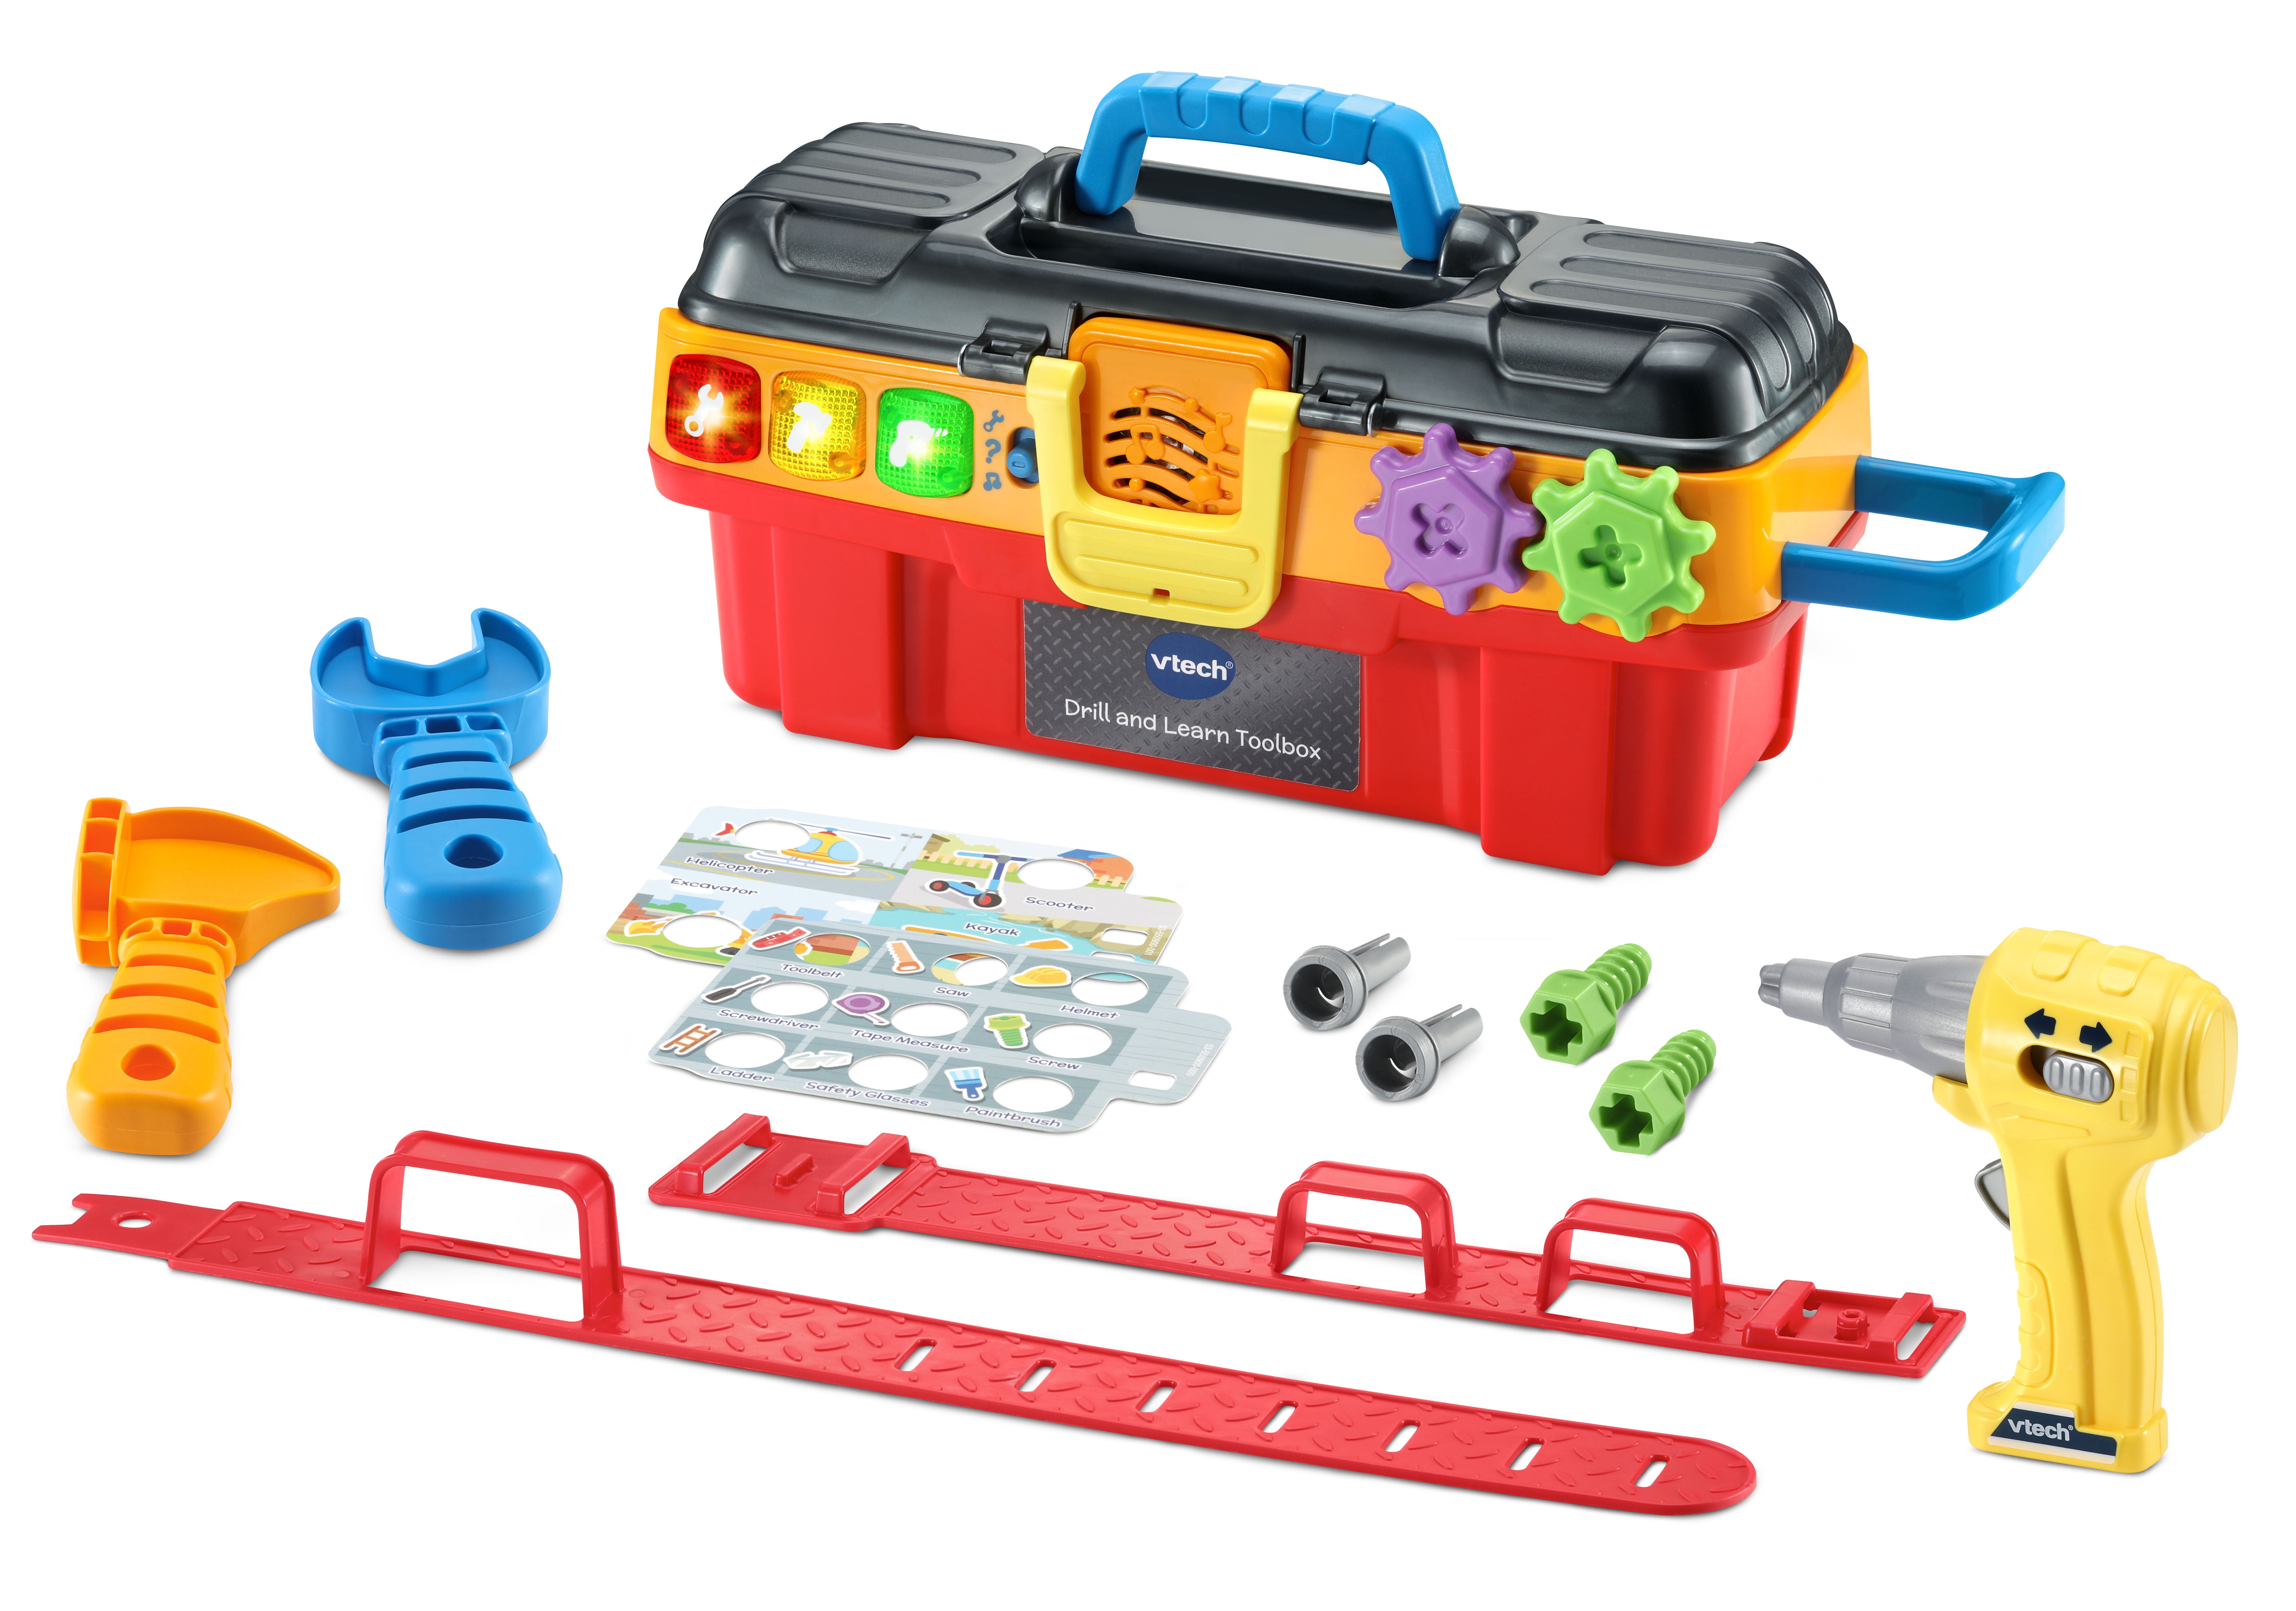 VTech Drill and Learn Toolbox Pro With Tool Belt, Tools, Project Cards